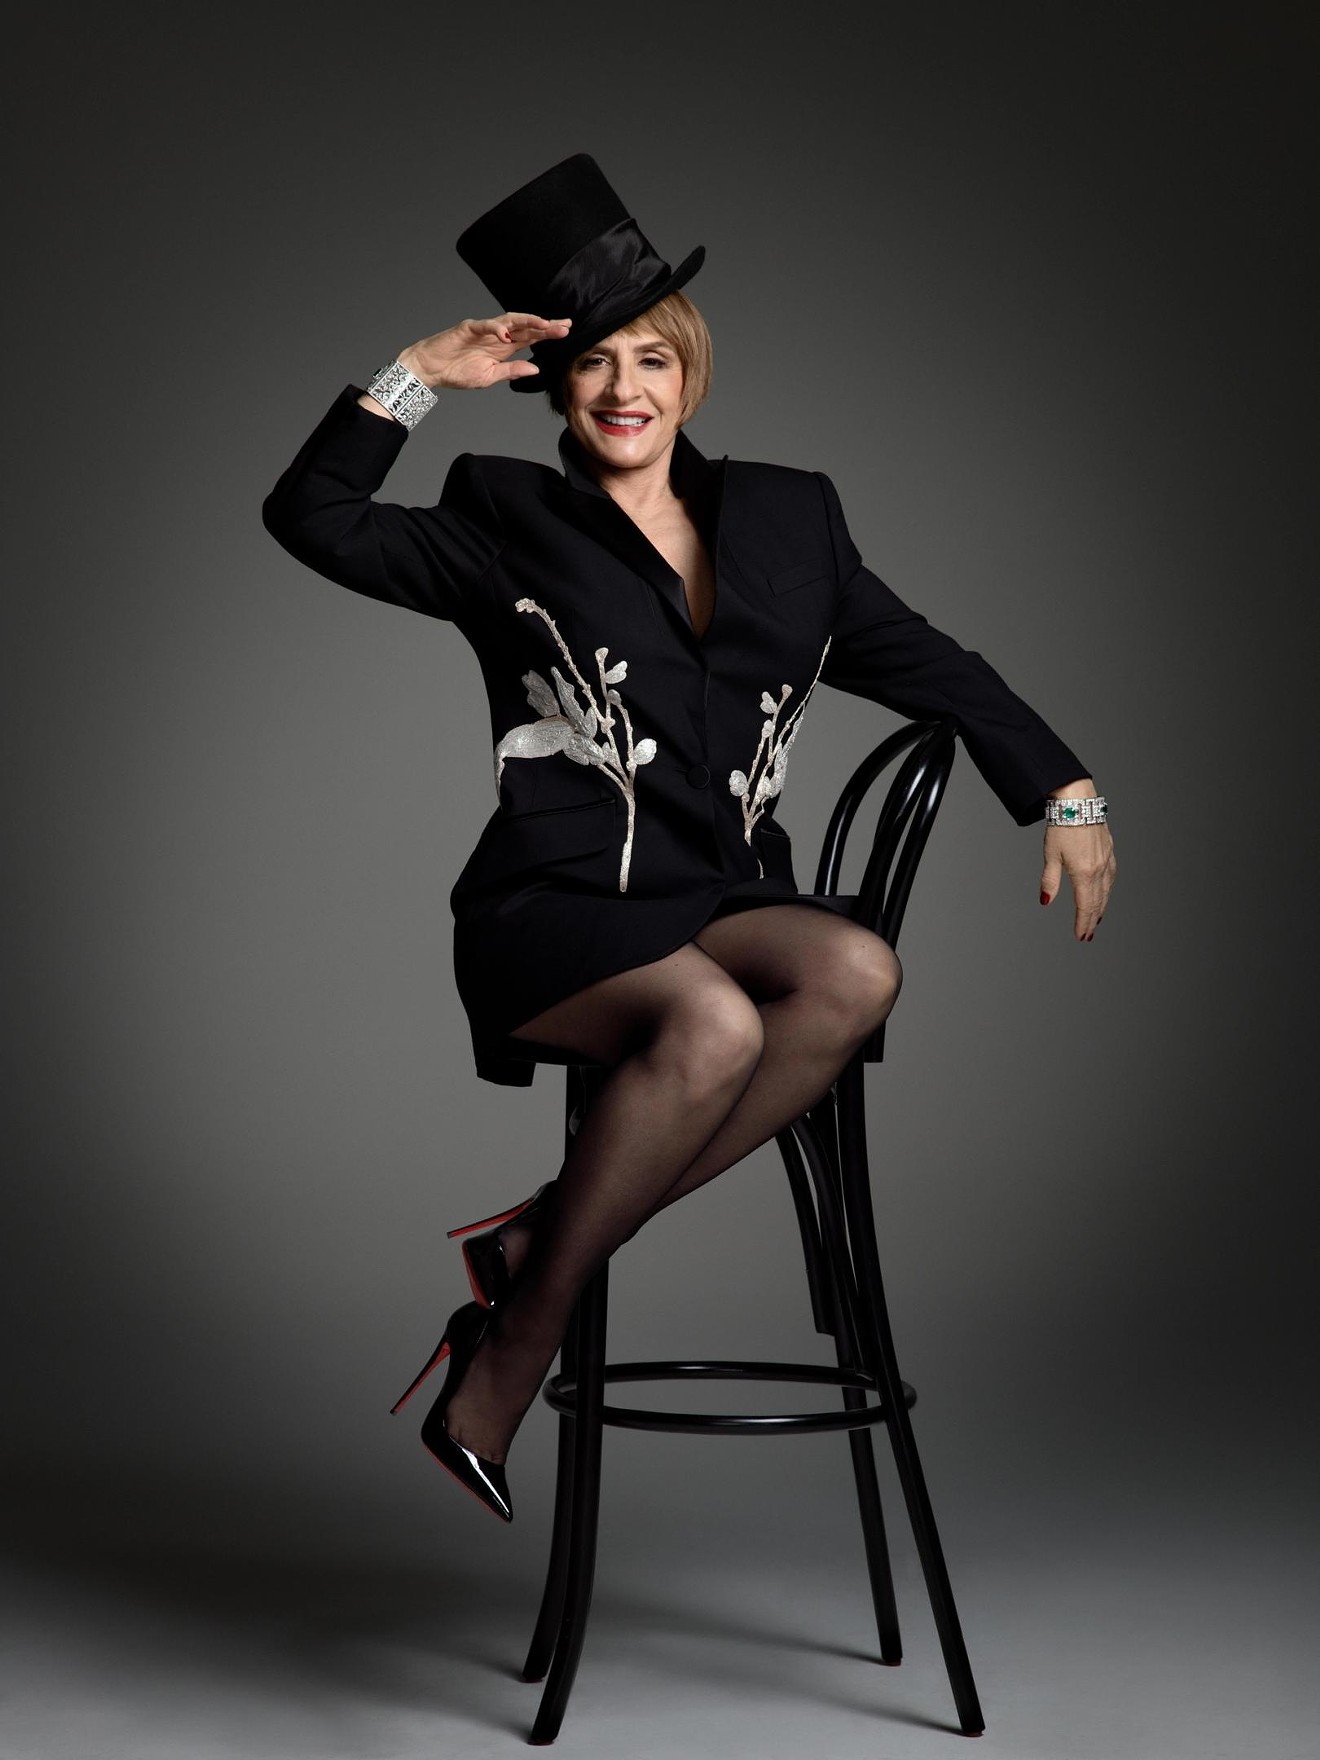 The three-time Tony Award-winning Patti LuPone took an audience through her "Life in Notes" Saturday night.